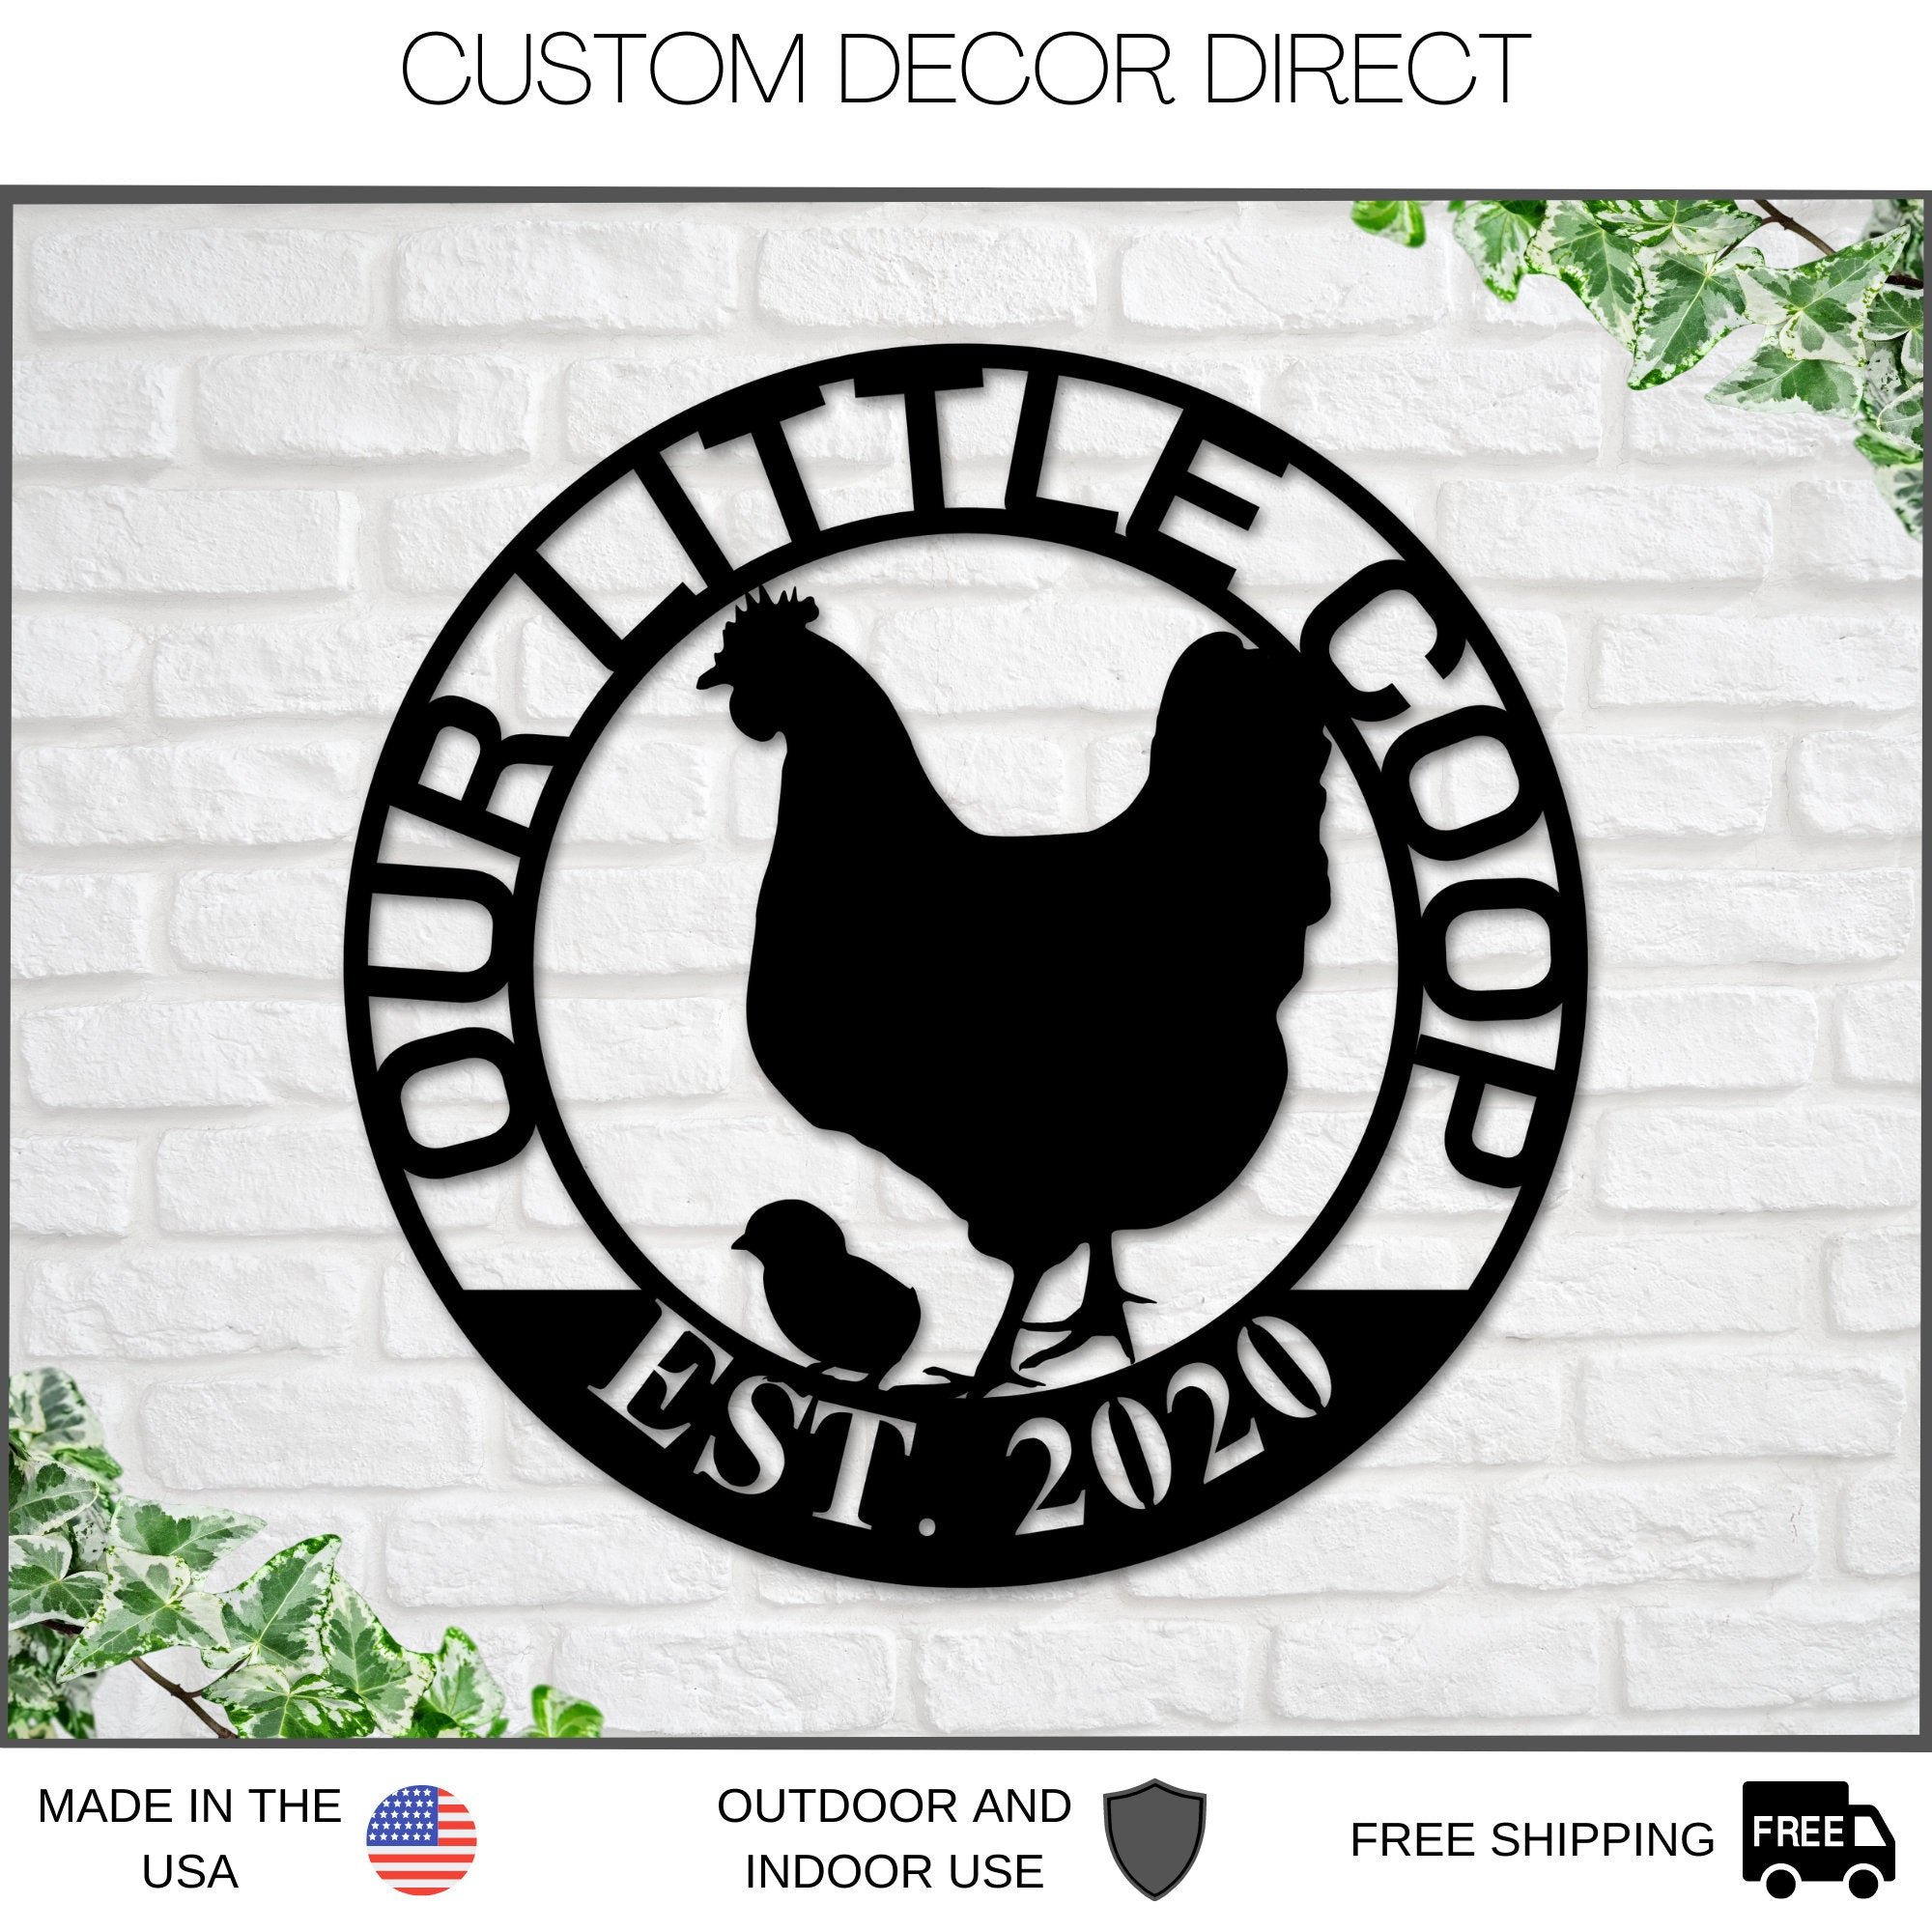 Mothers Day Gift, Personalized Mothers Day Gift, Gift For Mom, Our Little Coop Sign Metal Sign, Chicken Coop Sign, Metal Chicken Coop Sign Laser Cut Metal Signs Custom Gift Ideas 12x12IN